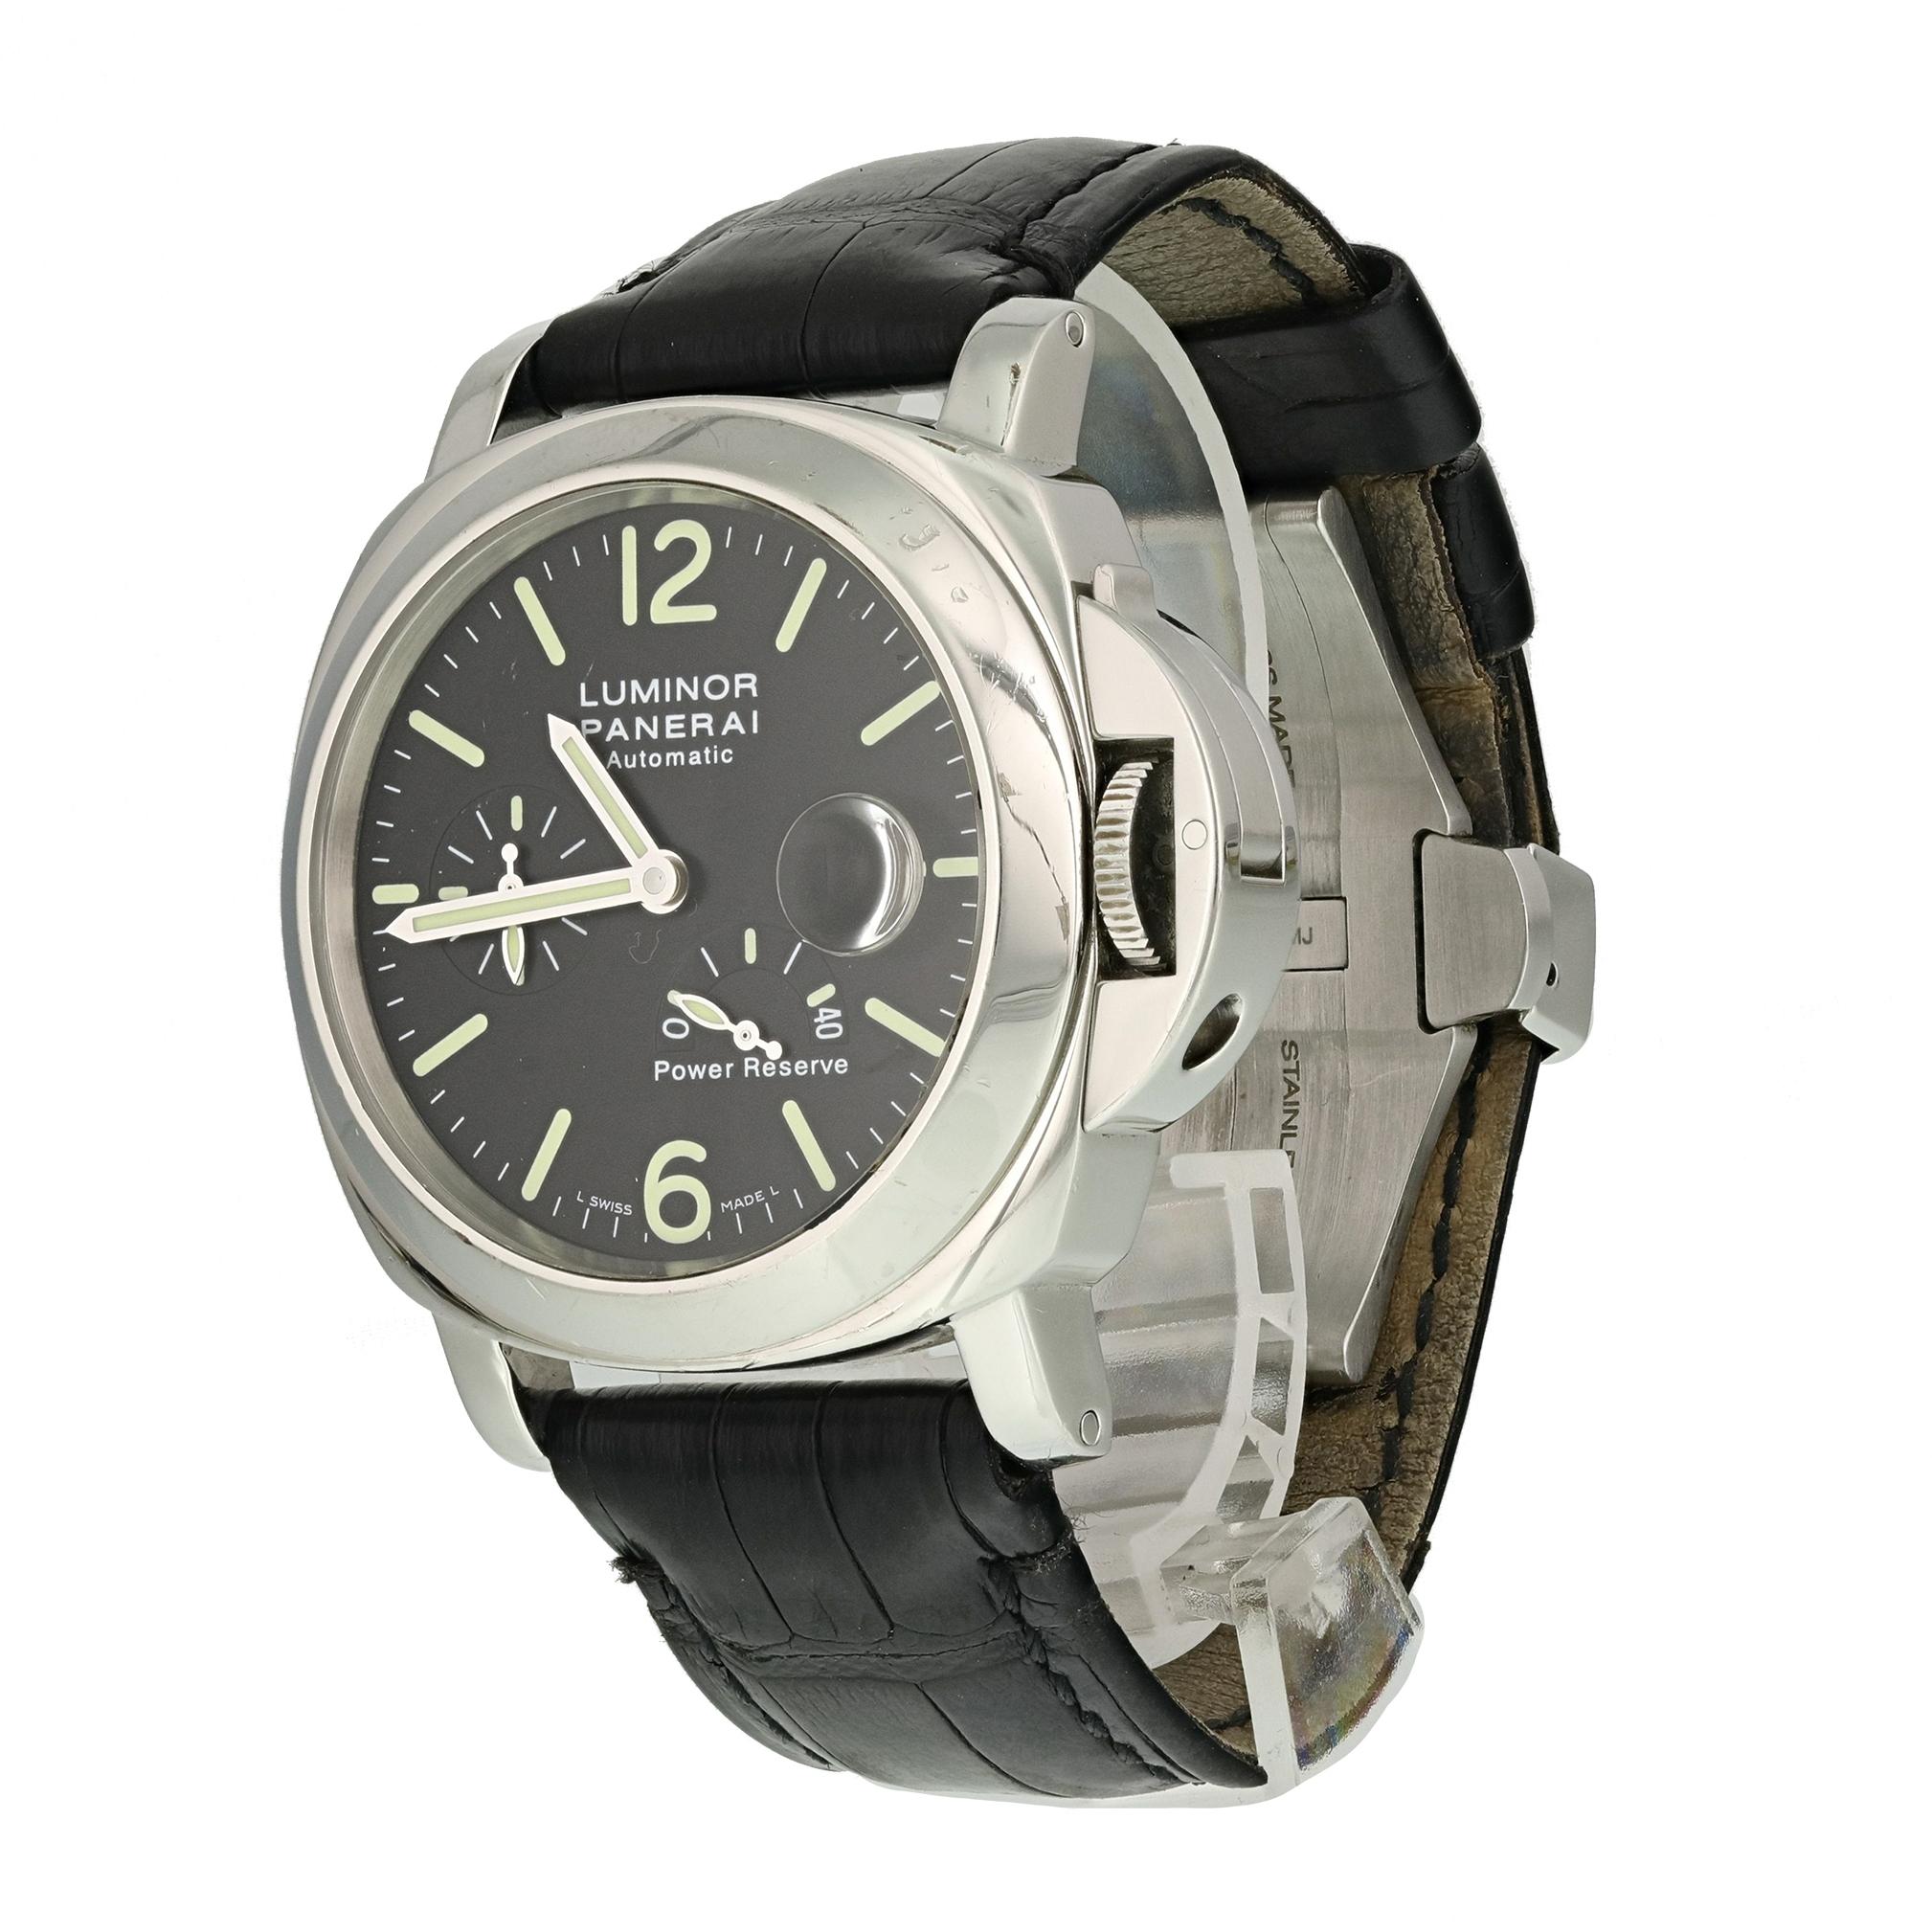 Panerai Luminor Power Reserve PAM00090 Men's Watch.
44mm Stainless Steel case. 
Stainless Steel Stationary bezel. 
Black dial with Luminous Steel hands and index hour markers. 
Minute markers on the outer dial. 
Date display at the 3 o'clock